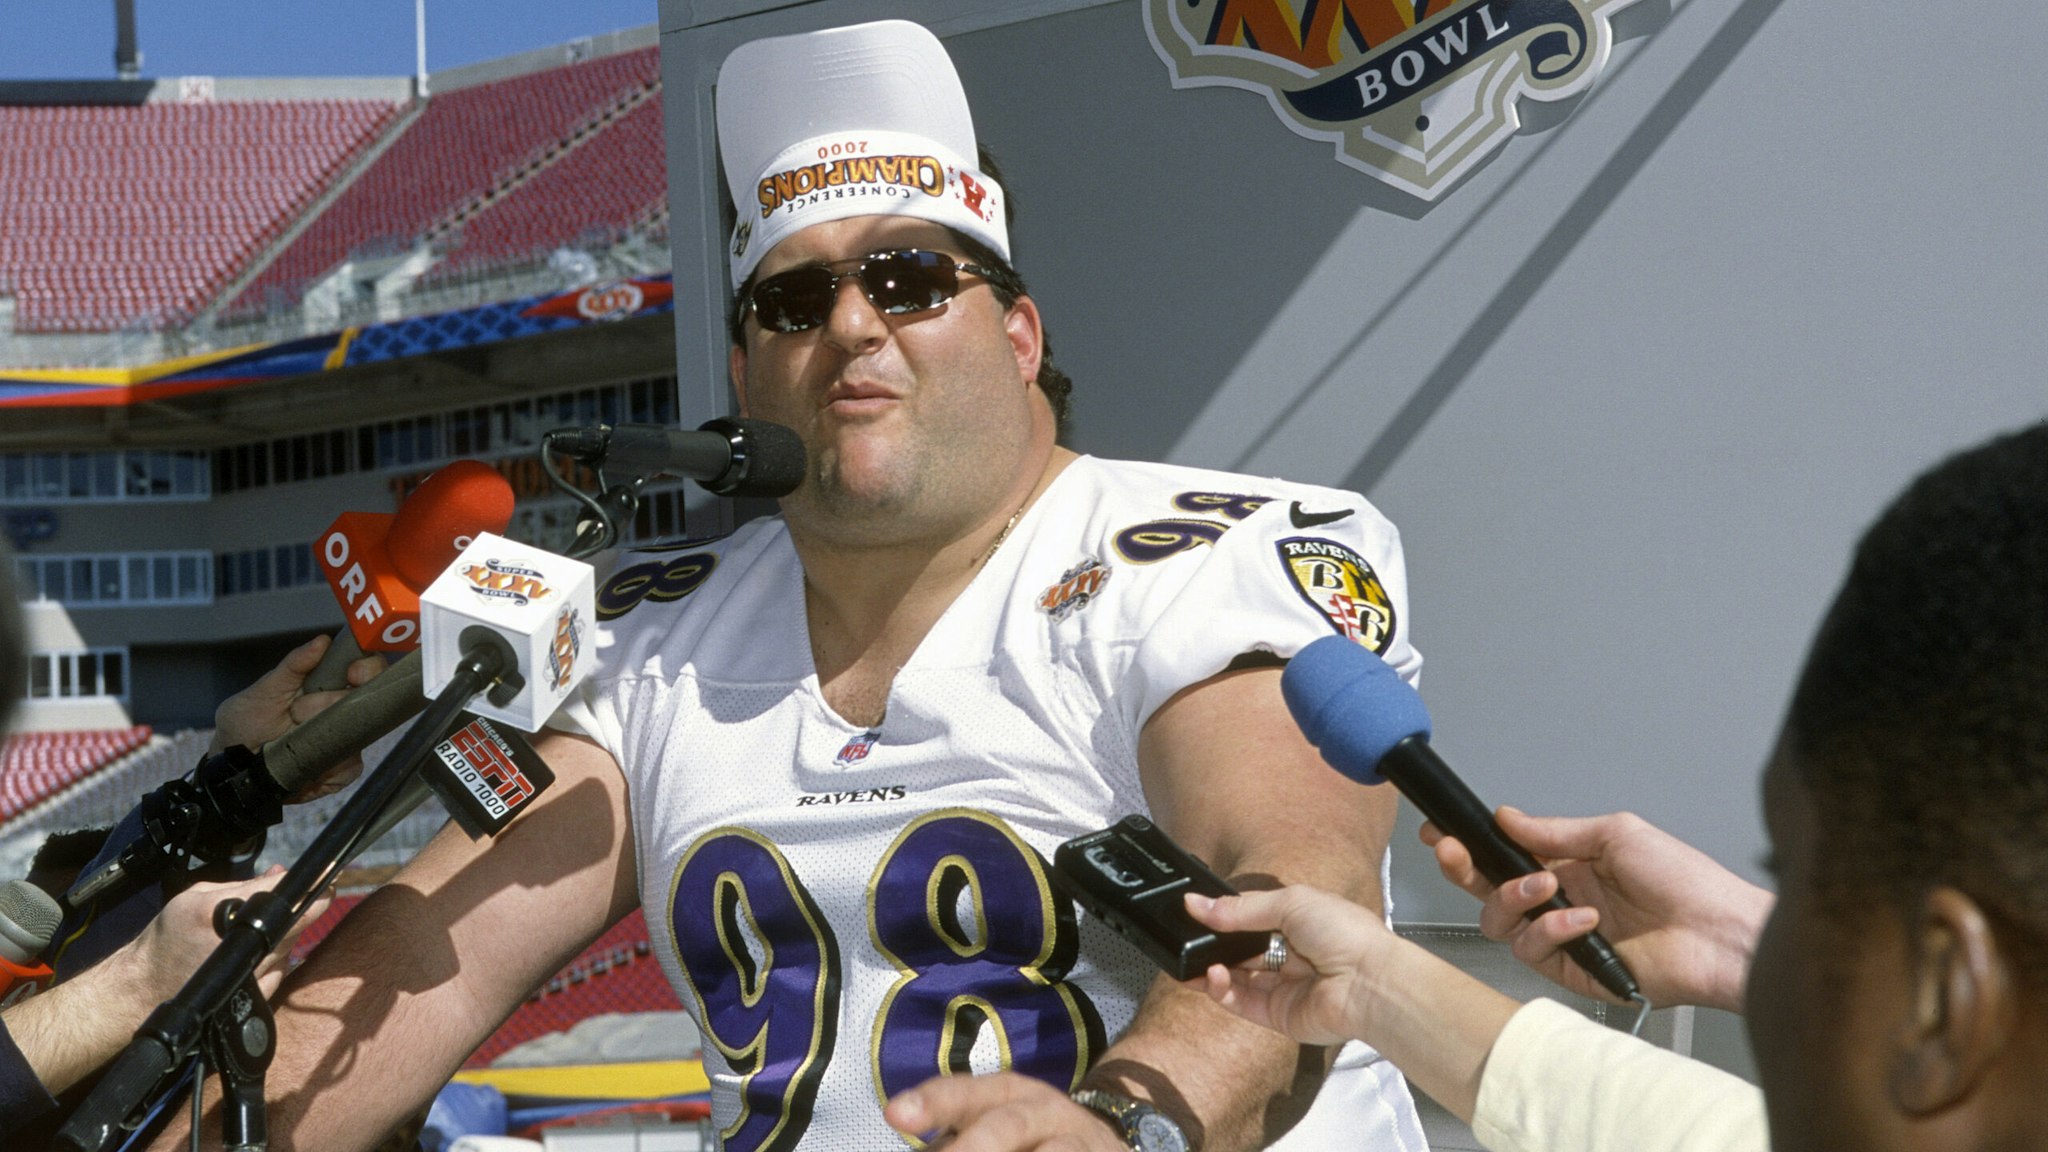 Former Super Bowl champion and popular sideline reporter Tony Siragusa died Wednesday, according to his old friend and former teammate, Jamal Lewis.